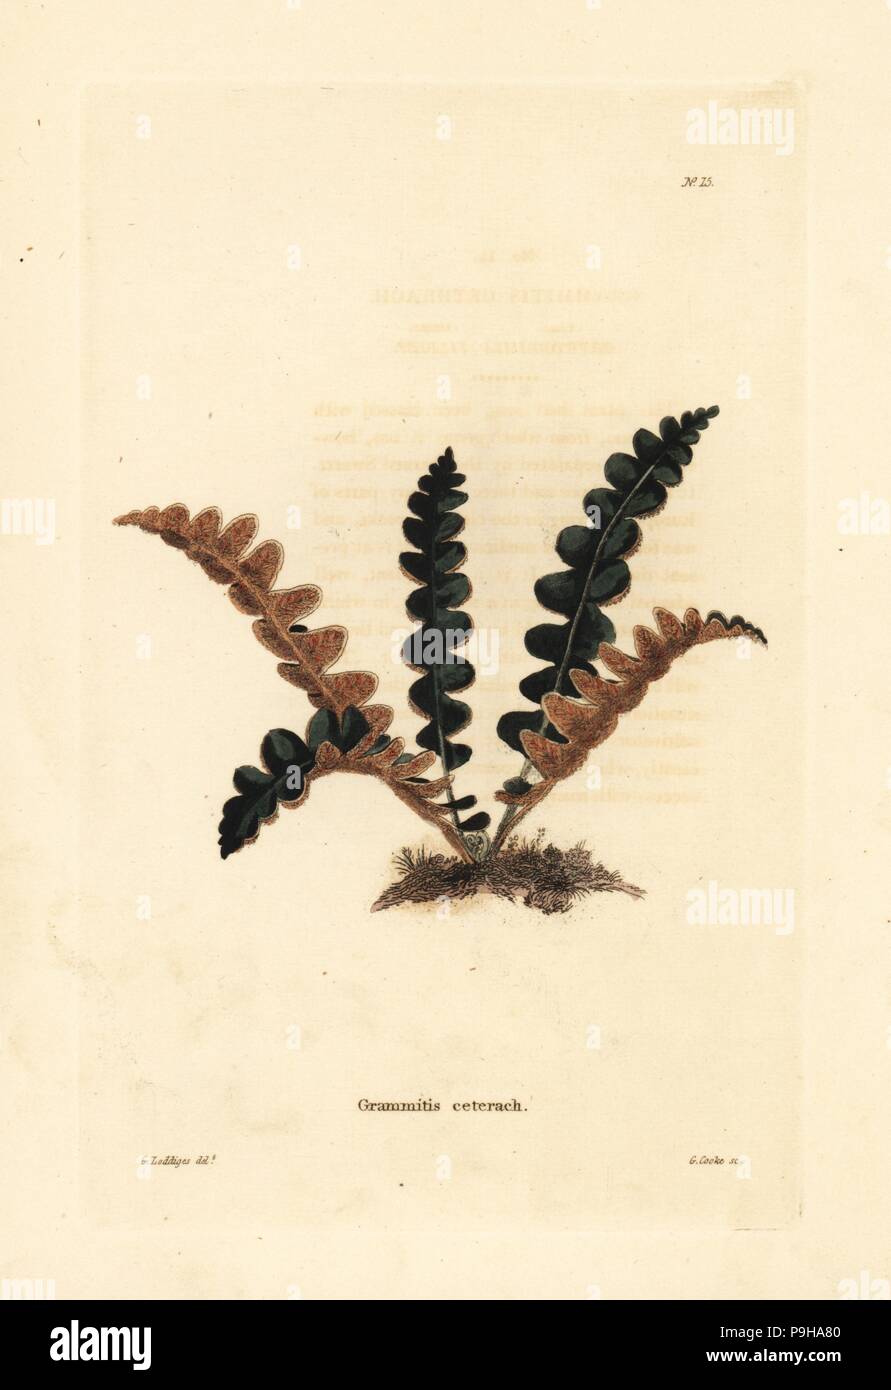 Rustyback fern, Ceterach officinarum (Grammitis ceterach). Handcoloured copperplate engraving by George Cooke after George Loddiges from Conrad Loddiges' Botanical Cabinet, Hackney, 1817. Stock Photo